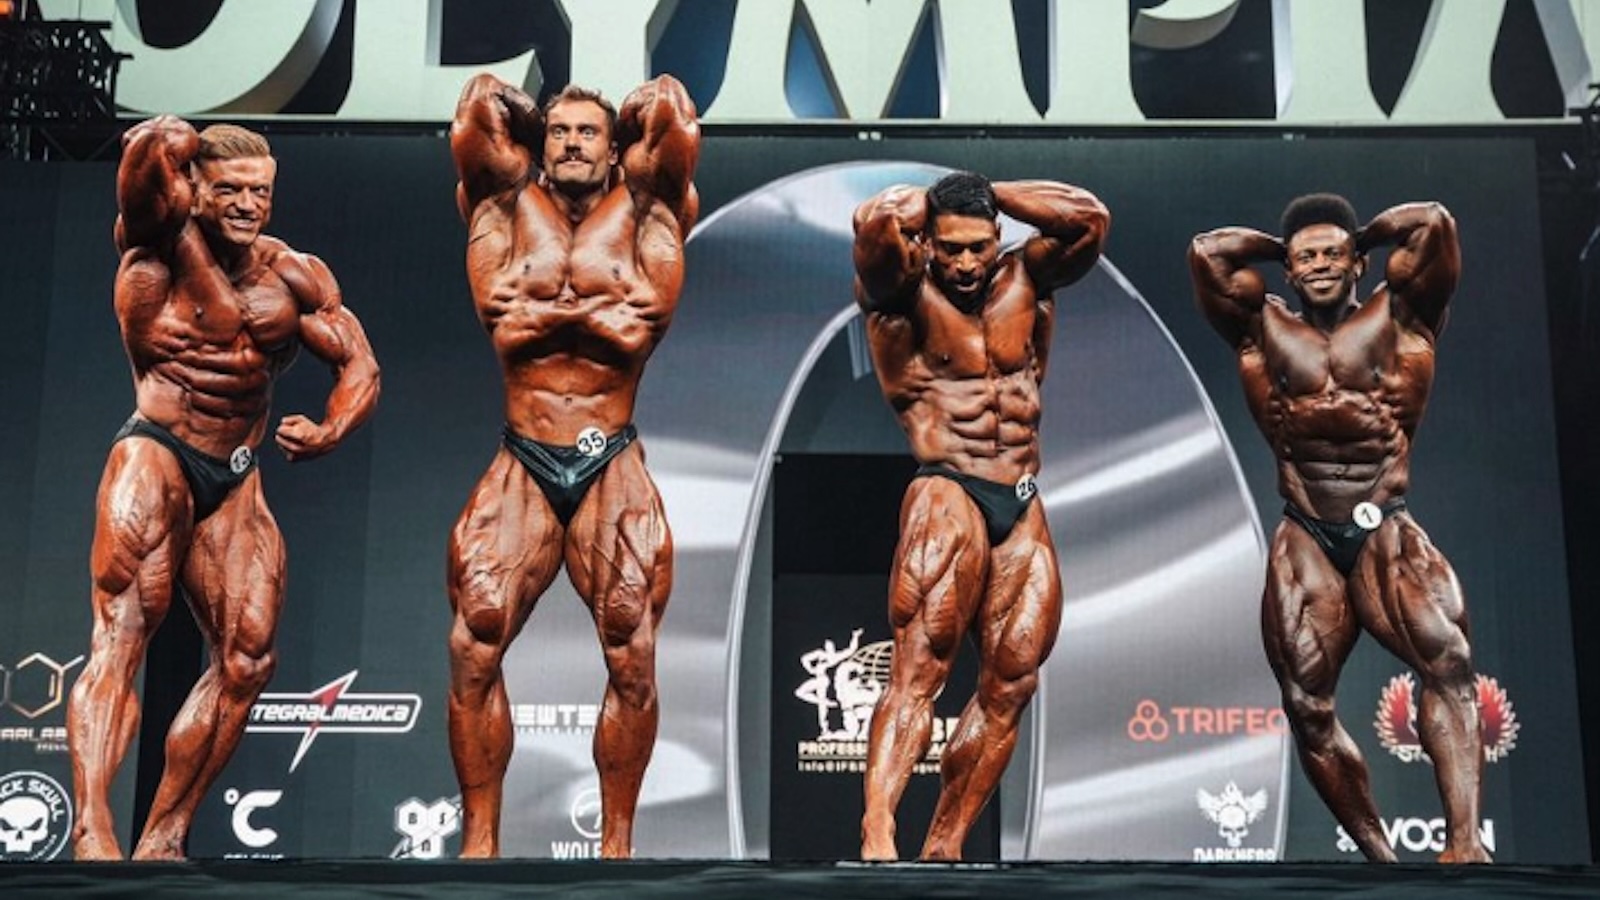 Chris Bumstead Recreated Arnold Schwarzenegger's Signature Pose for His  11.9 Million Insta Fans Days Ahead of Mr. Olympia - EssentiallySports